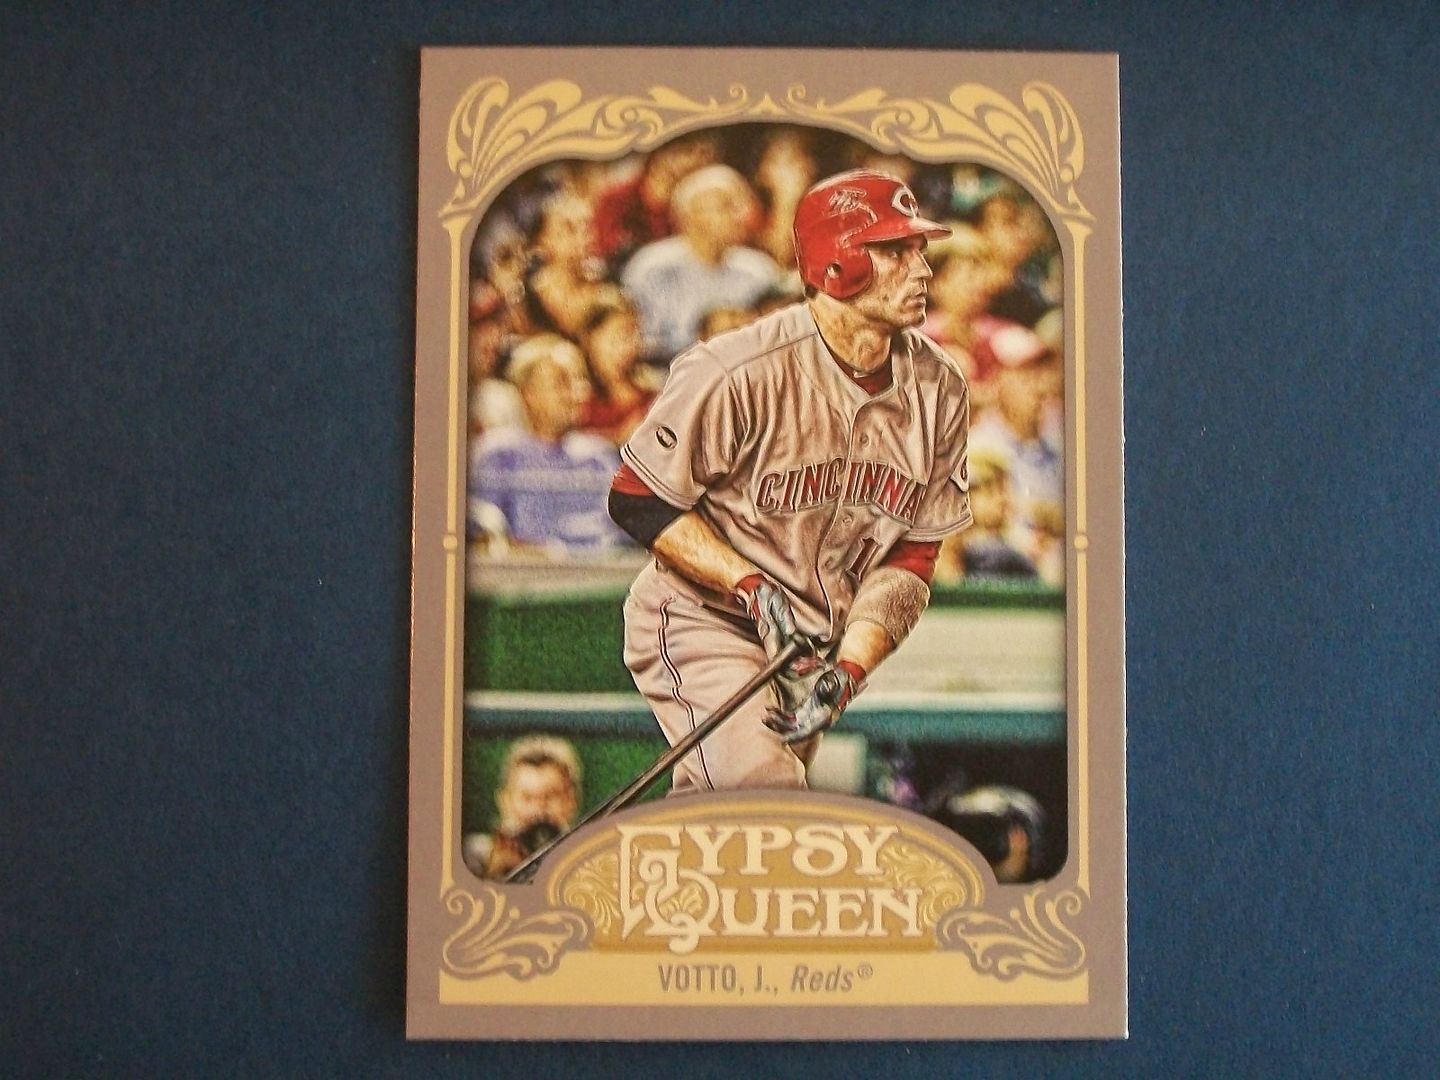 2012 Topps Gypsy Queen Joey Votto Sp